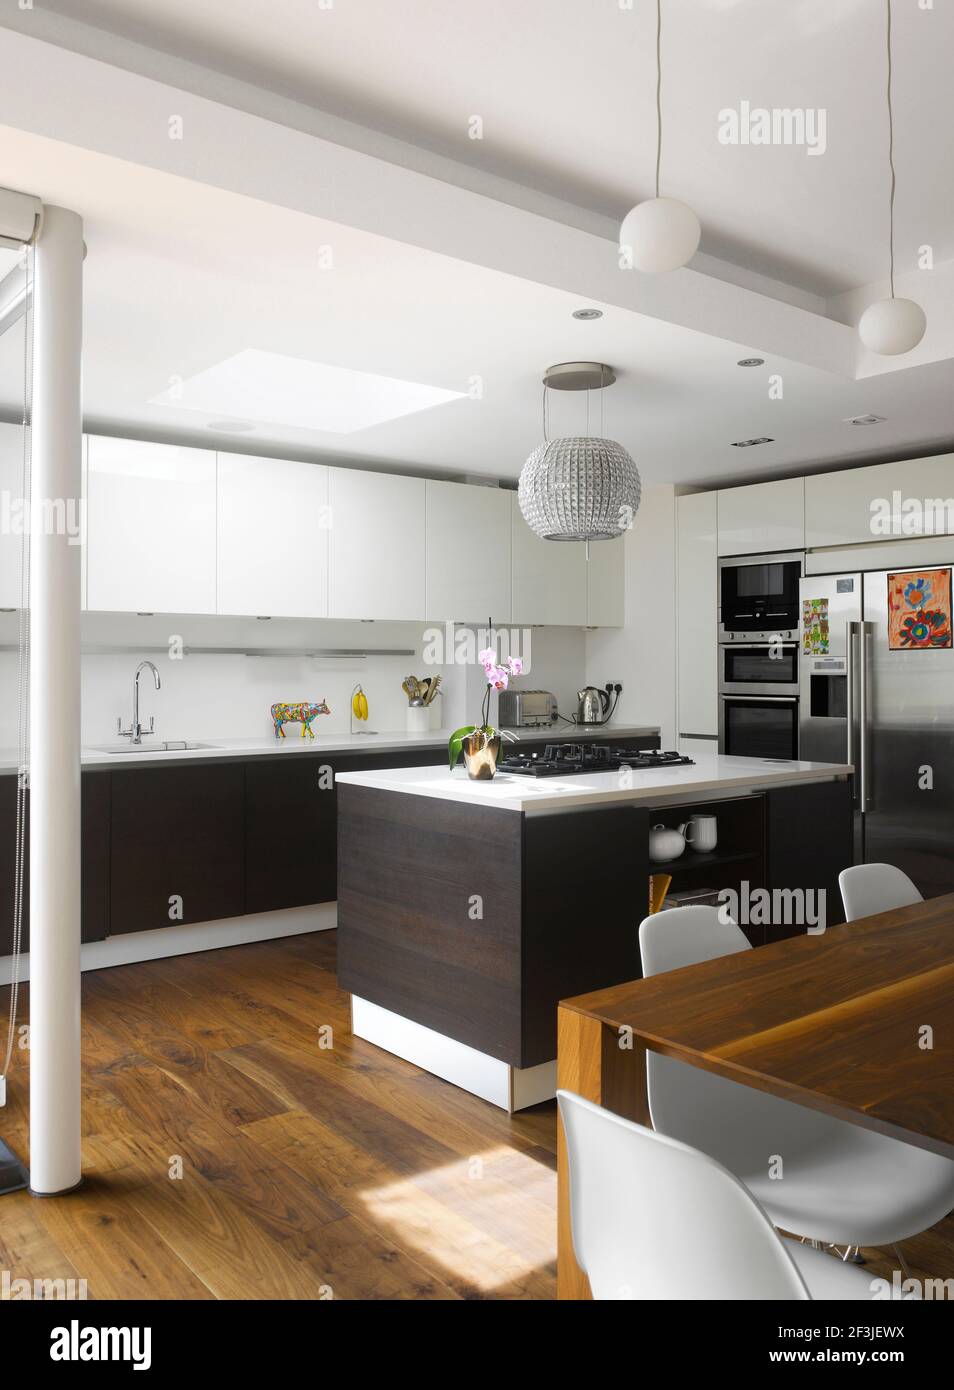 Modern kitchen with island unit and white fitted units Stock Photo